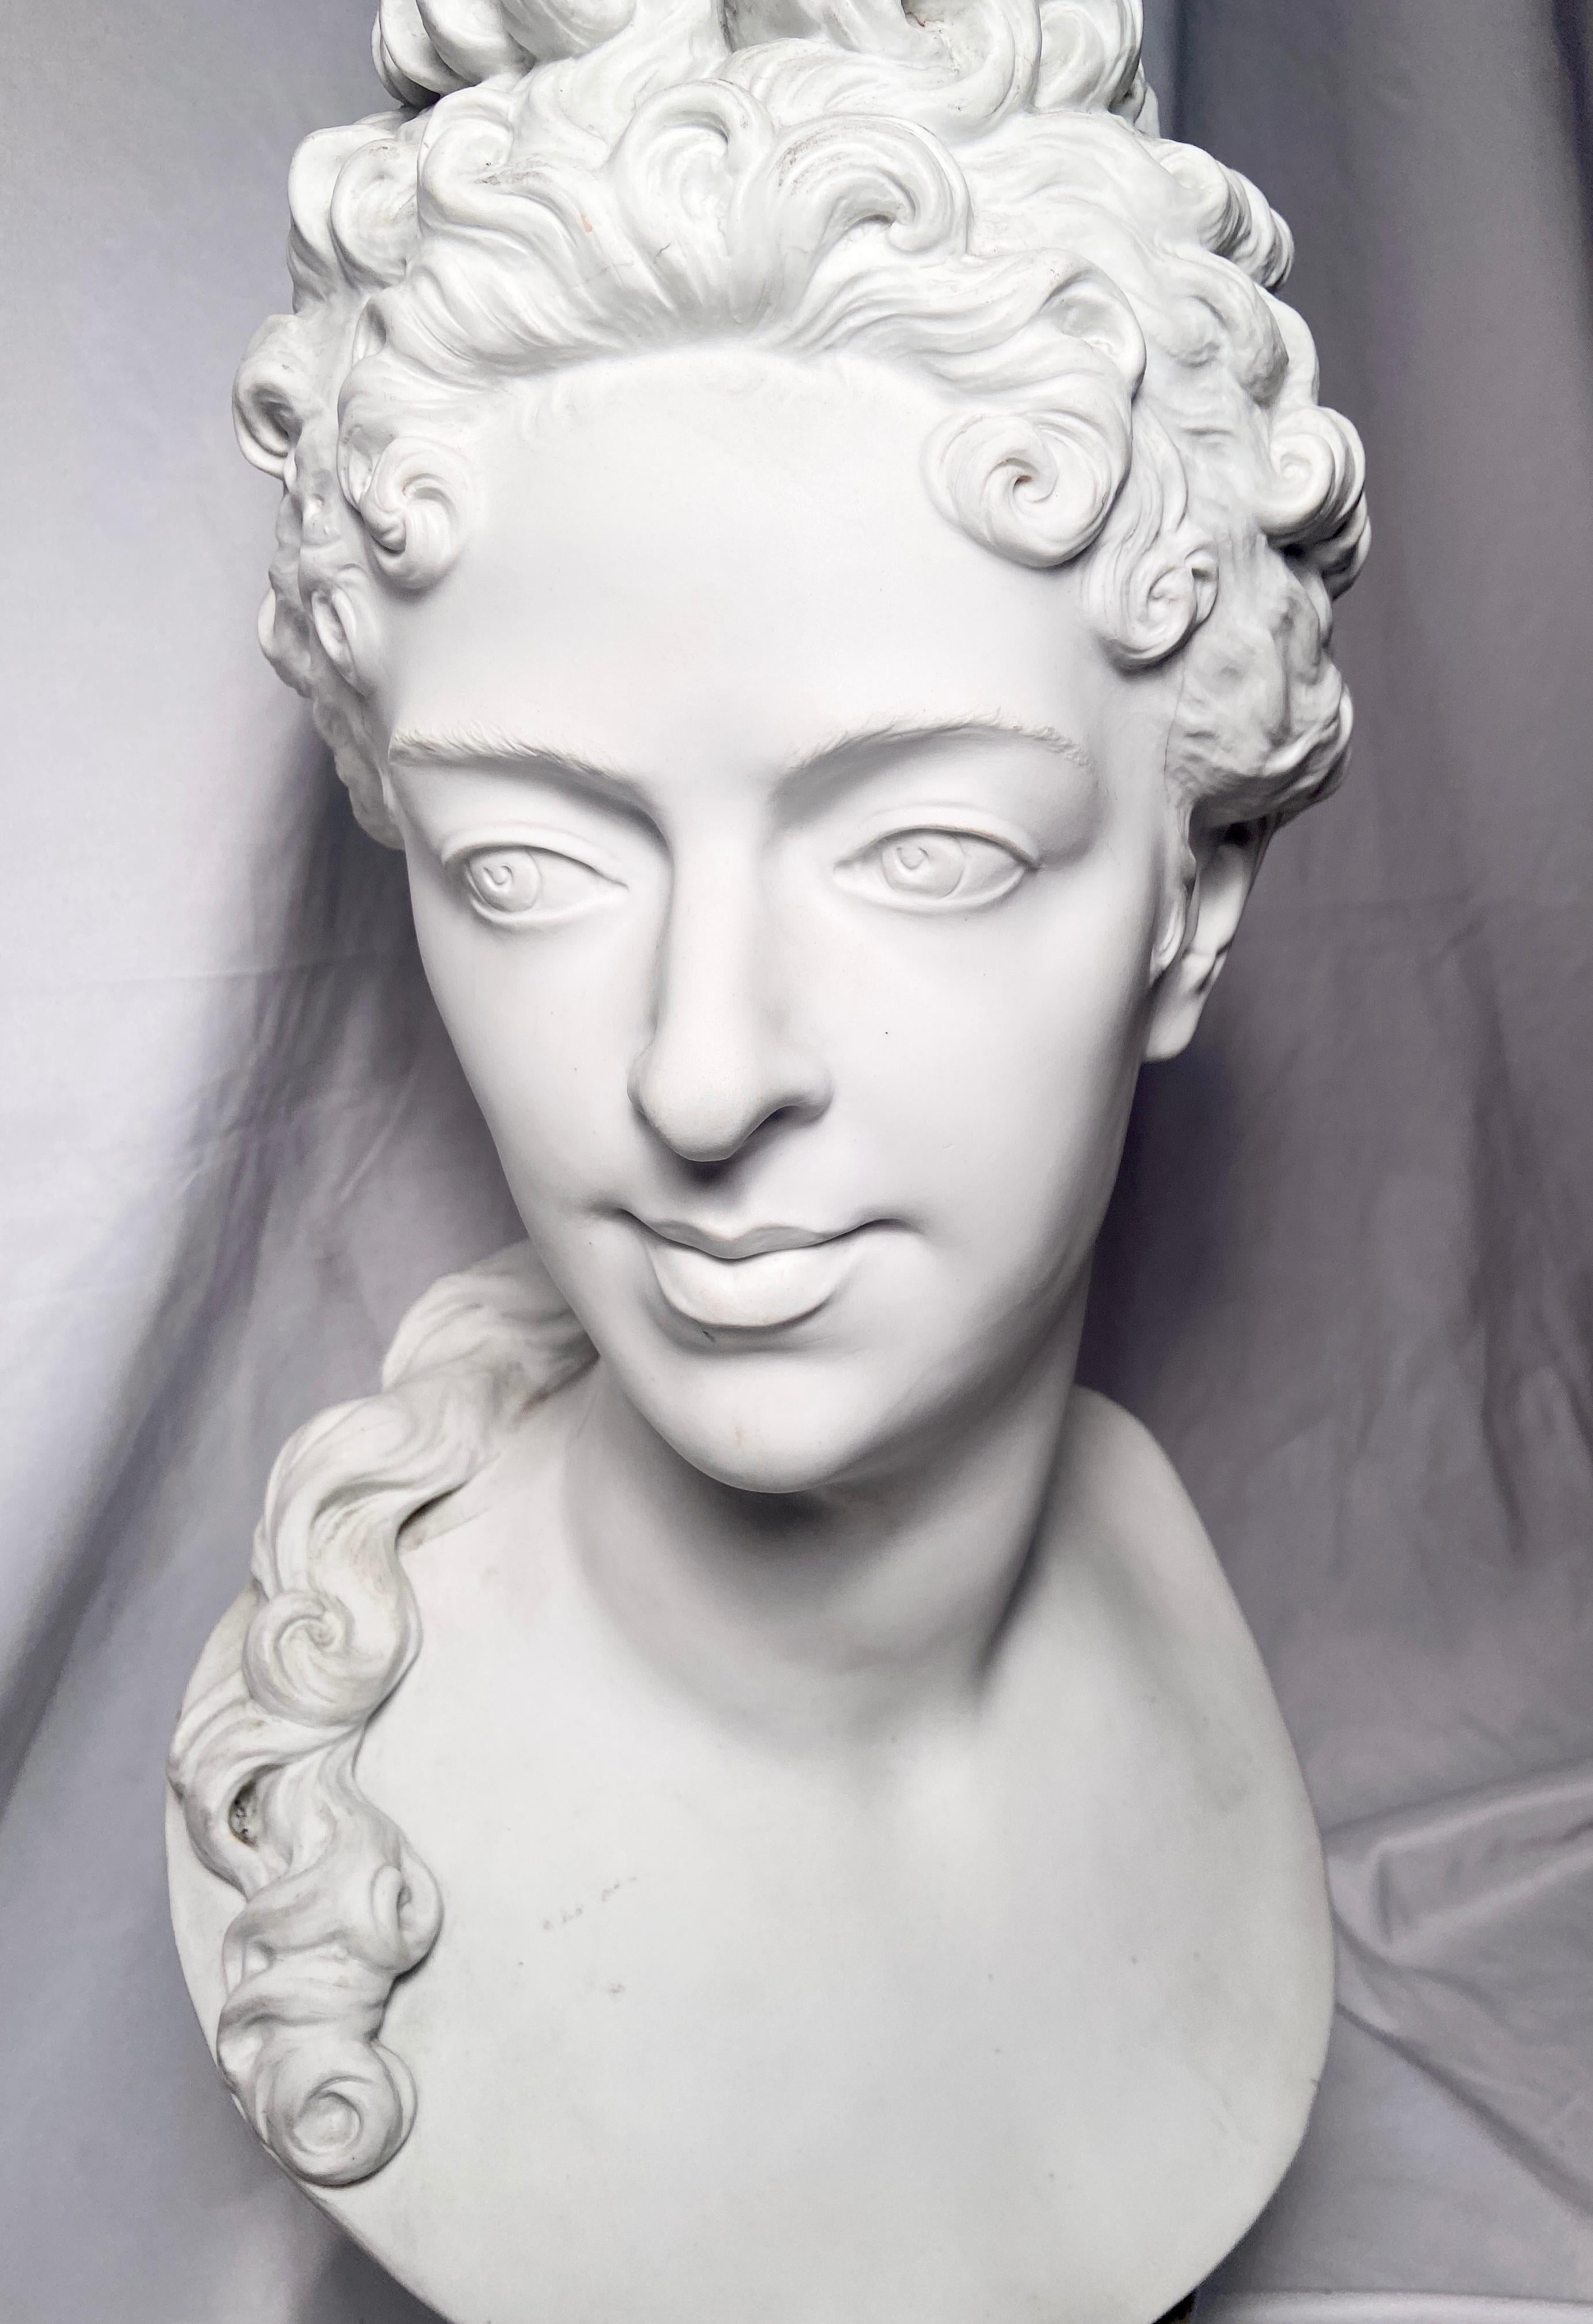 Antique 19th Century French Bisque Porcelain Bust of Diana, Goddess of the Hunt In Good Condition For Sale In New Orleans, LA